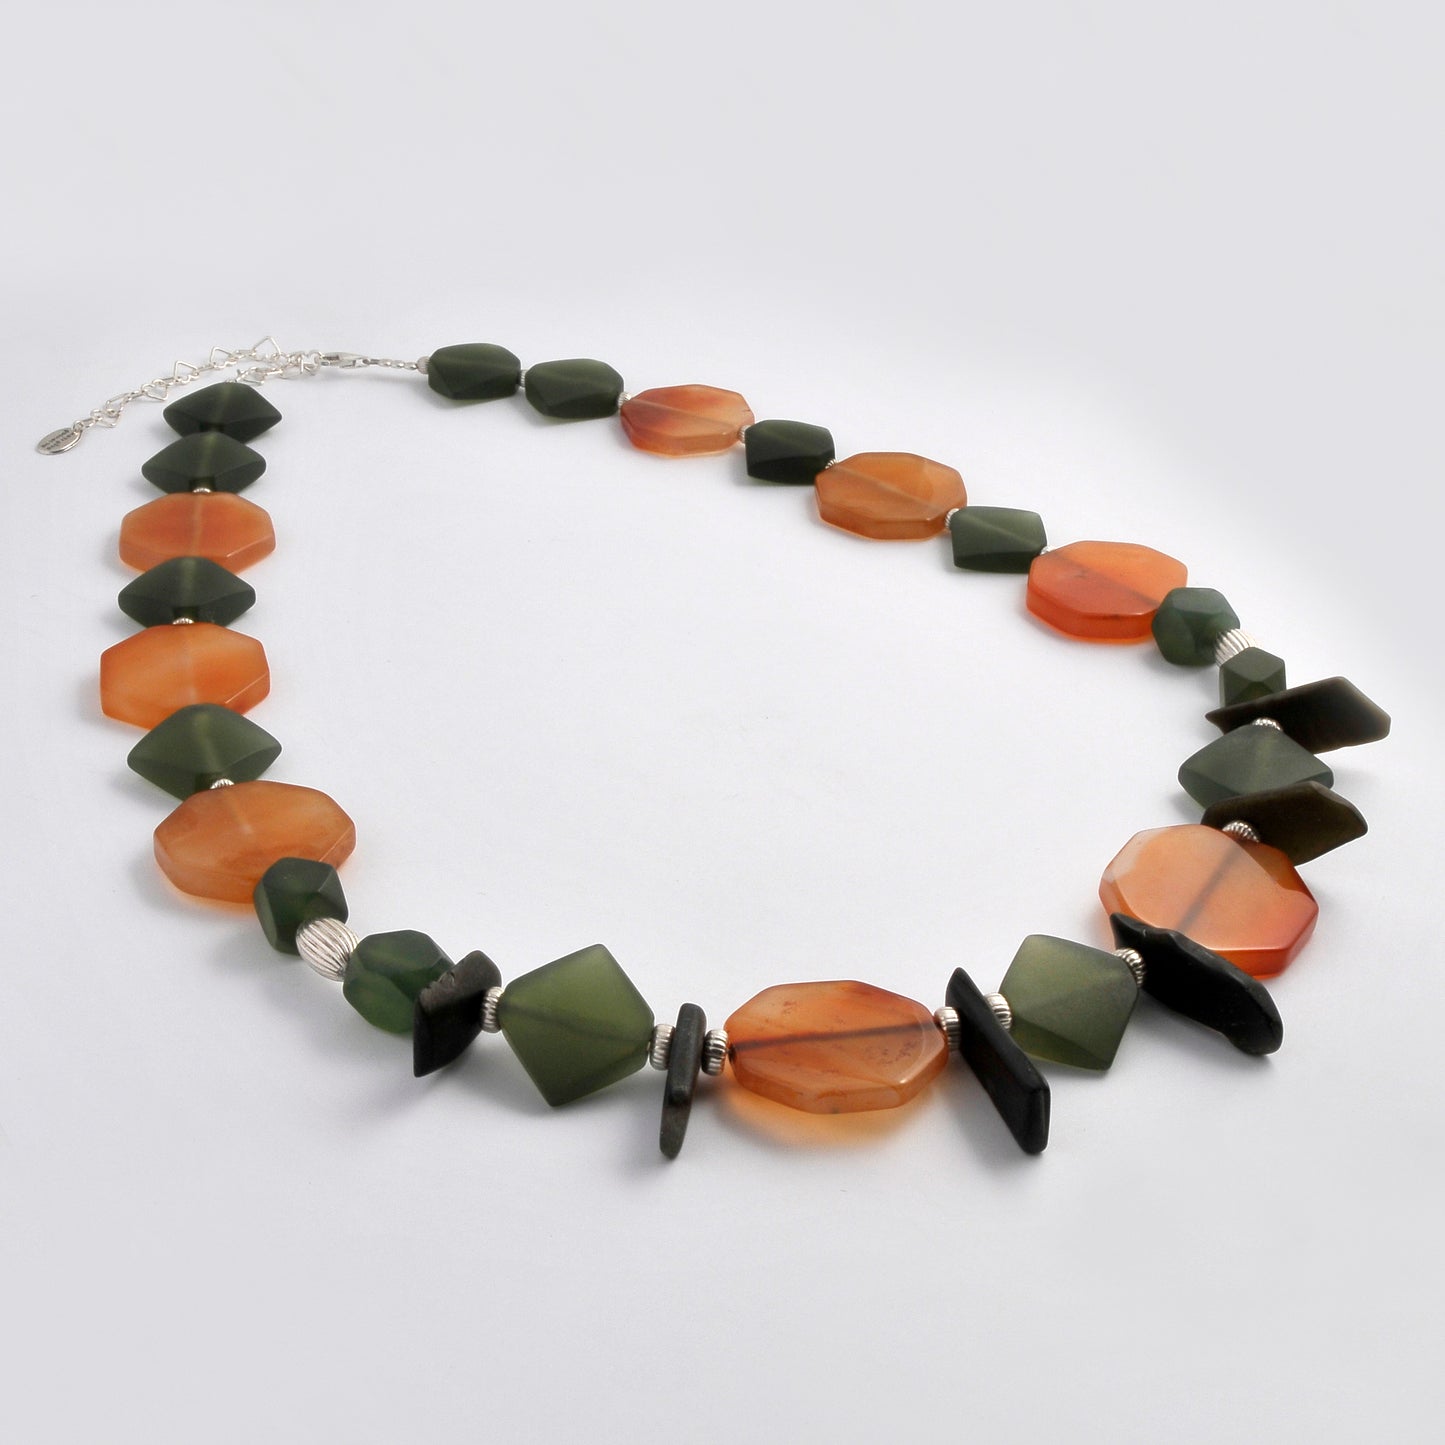 Ethnic necklace with Jade,Cornelians and Sterling silver.